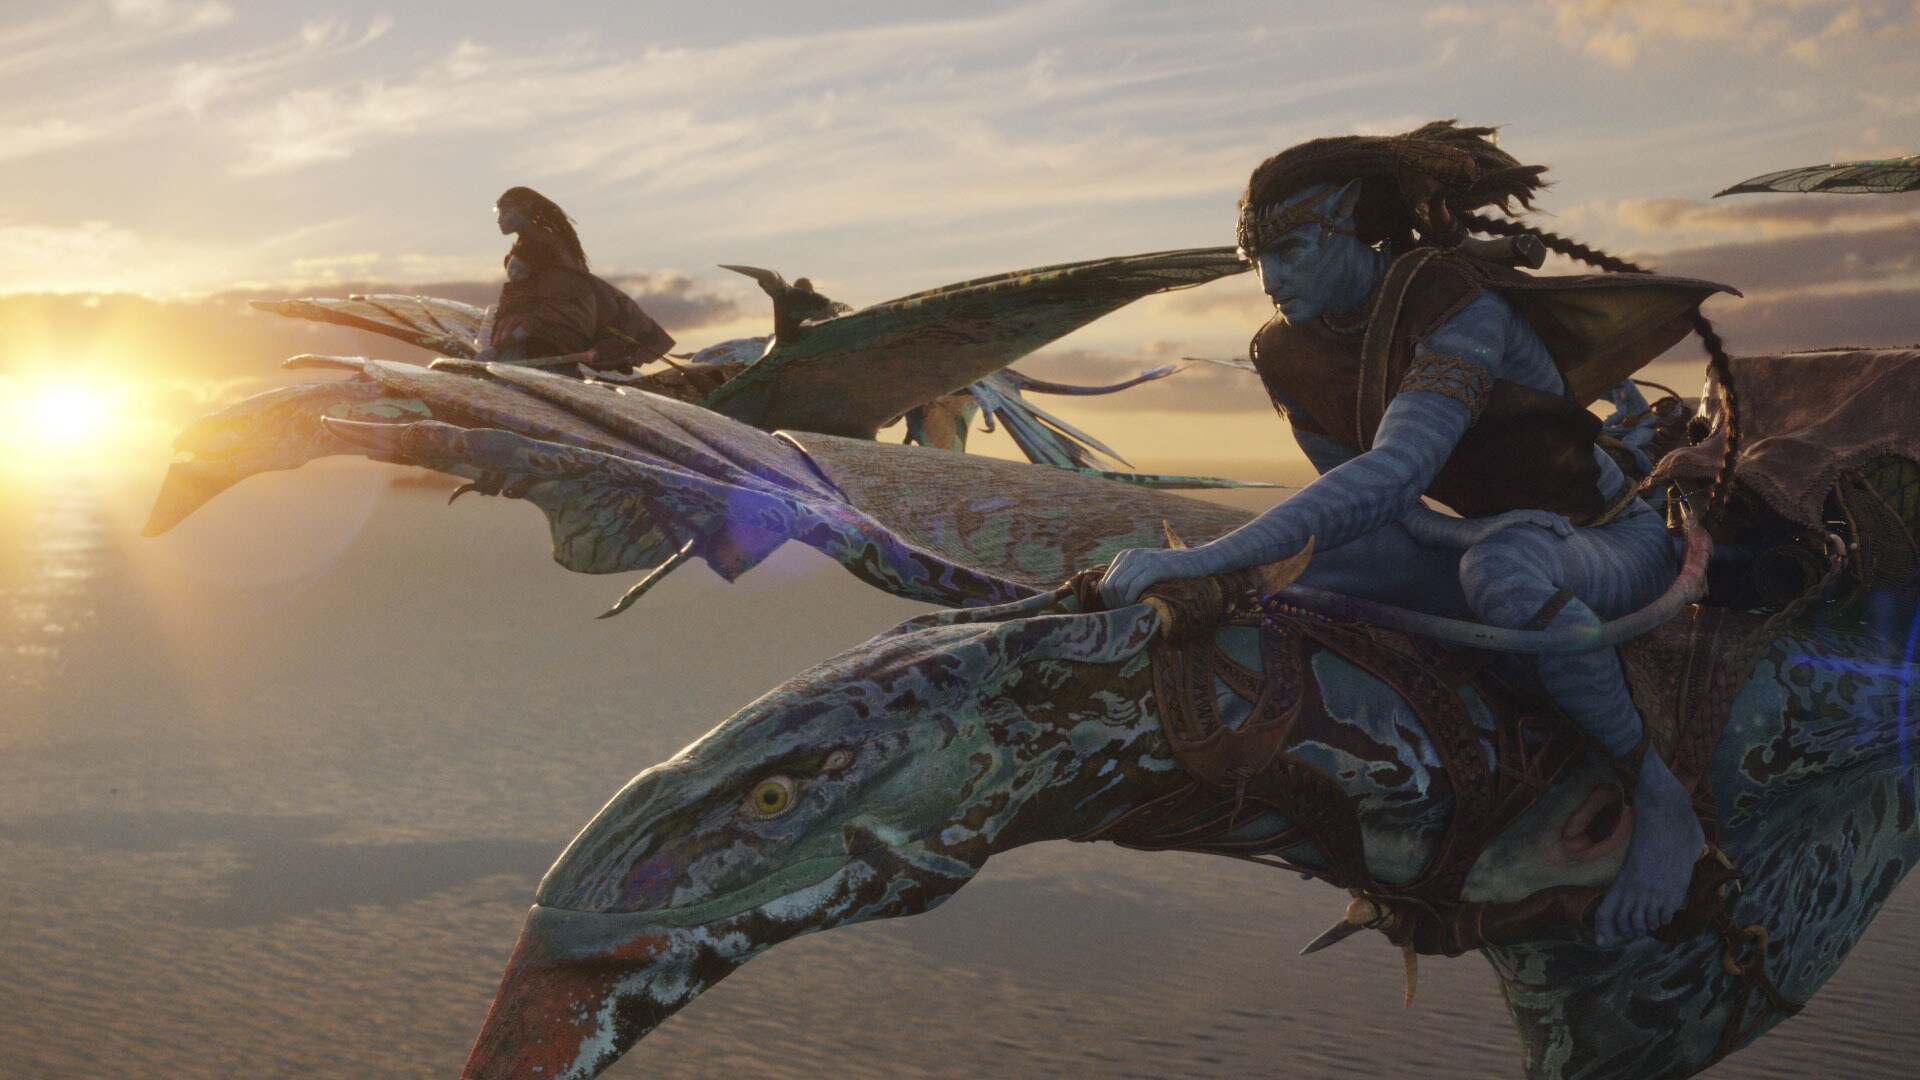 Image of a character on a flying creature from the 20th Century Studios movie Avatar: The Way of Water.